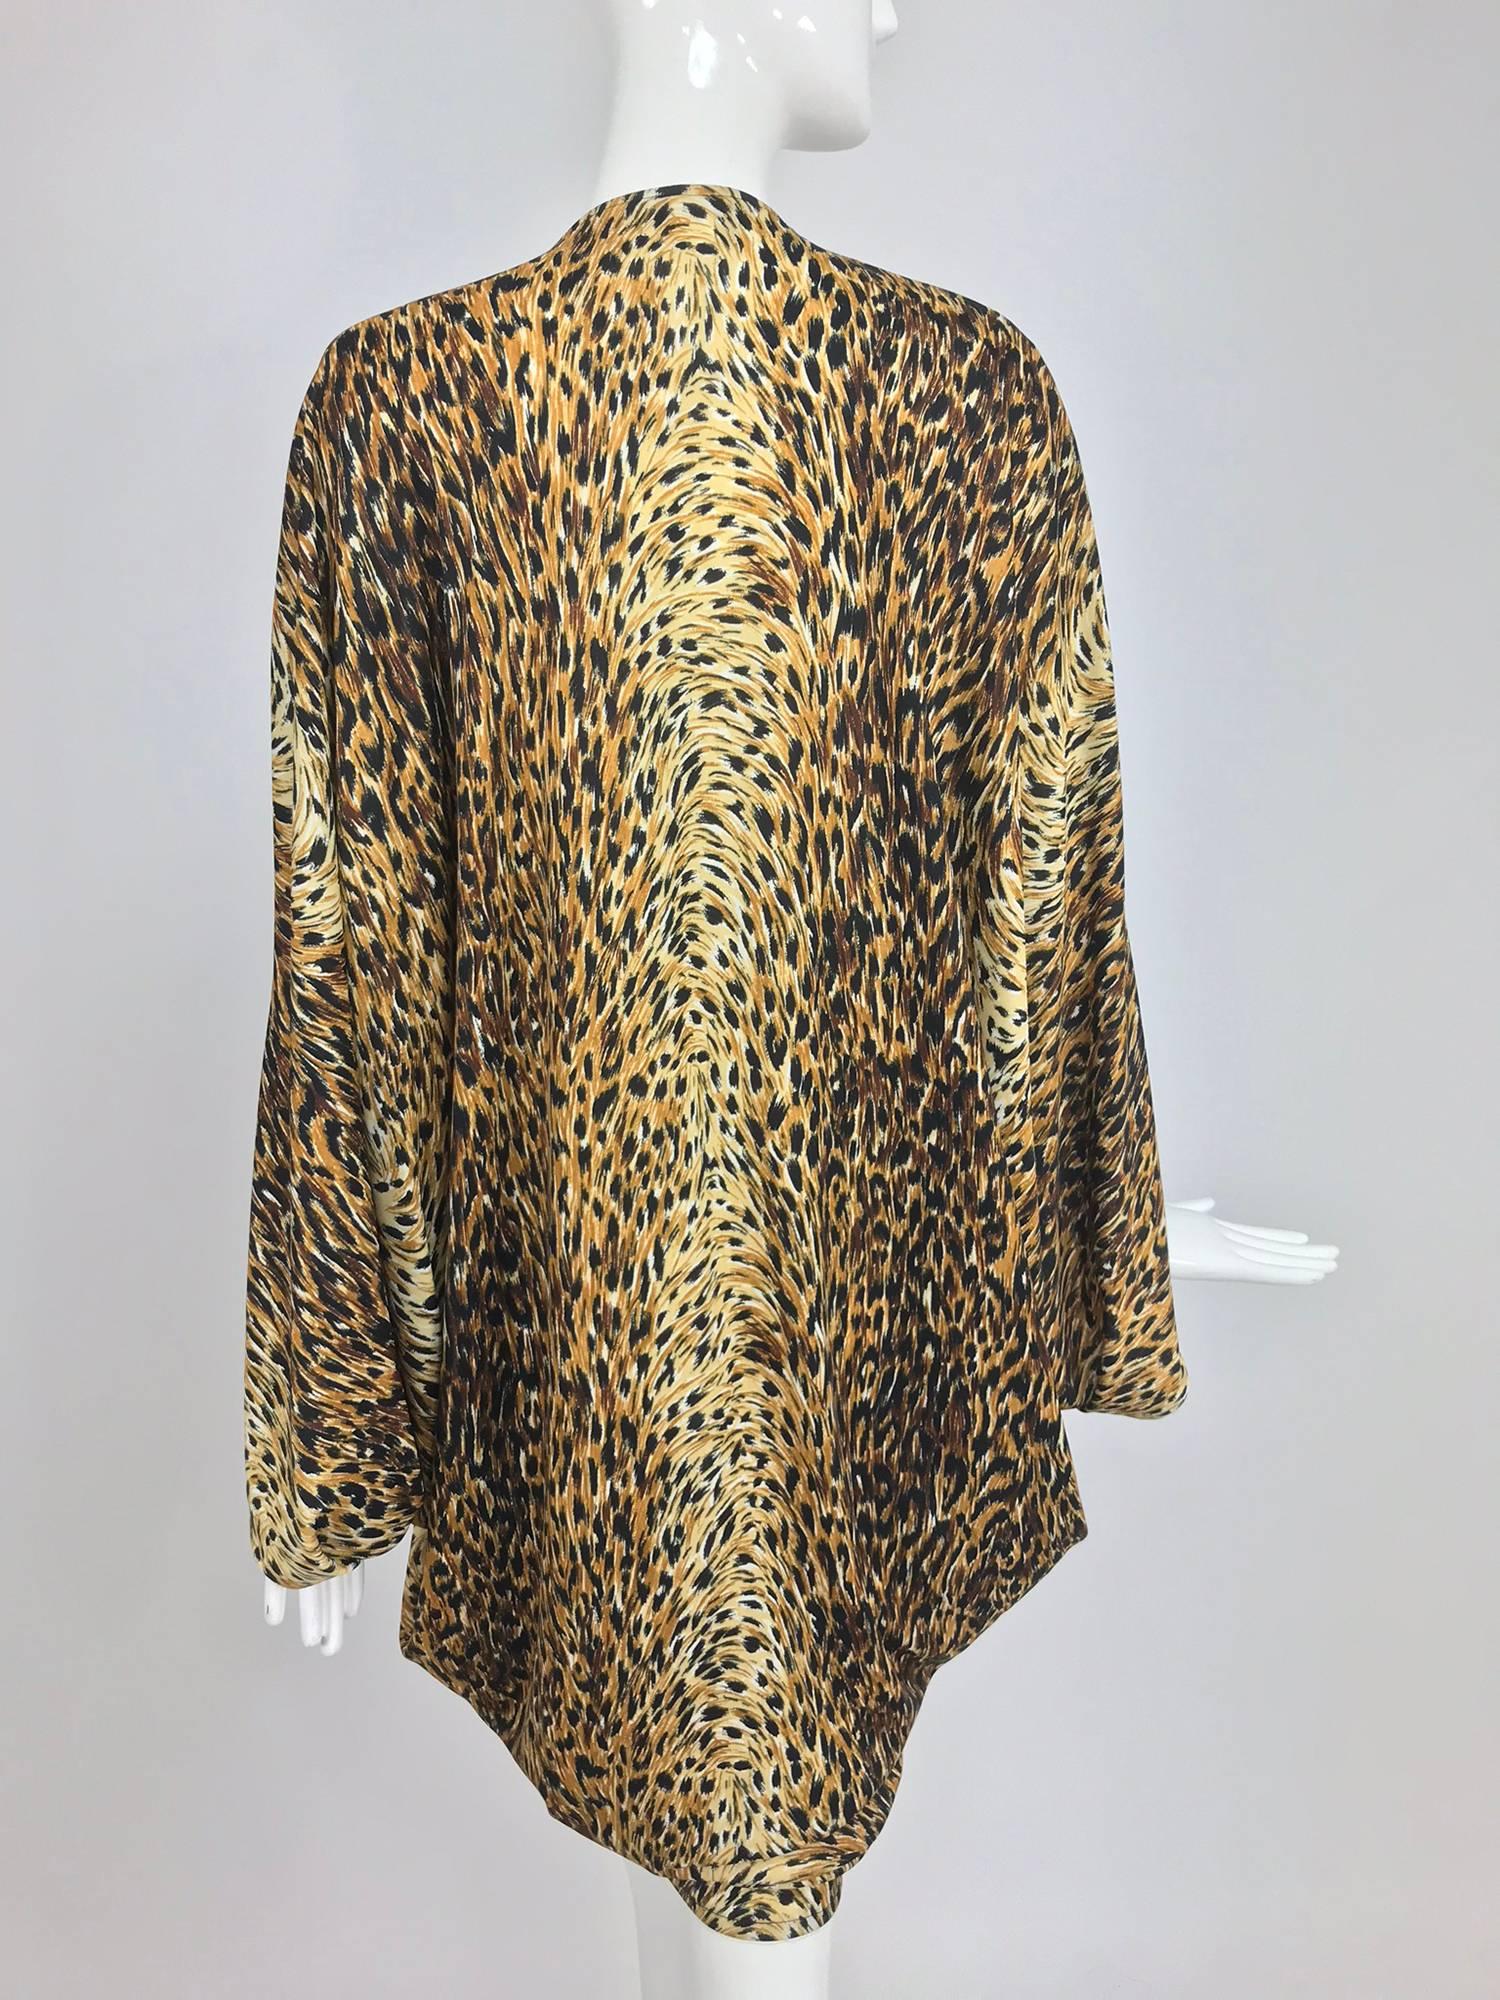 Norma Kamali OMO leopard print cocoon jacket 1980s In Excellent Condition For Sale In West Palm Beach, FL